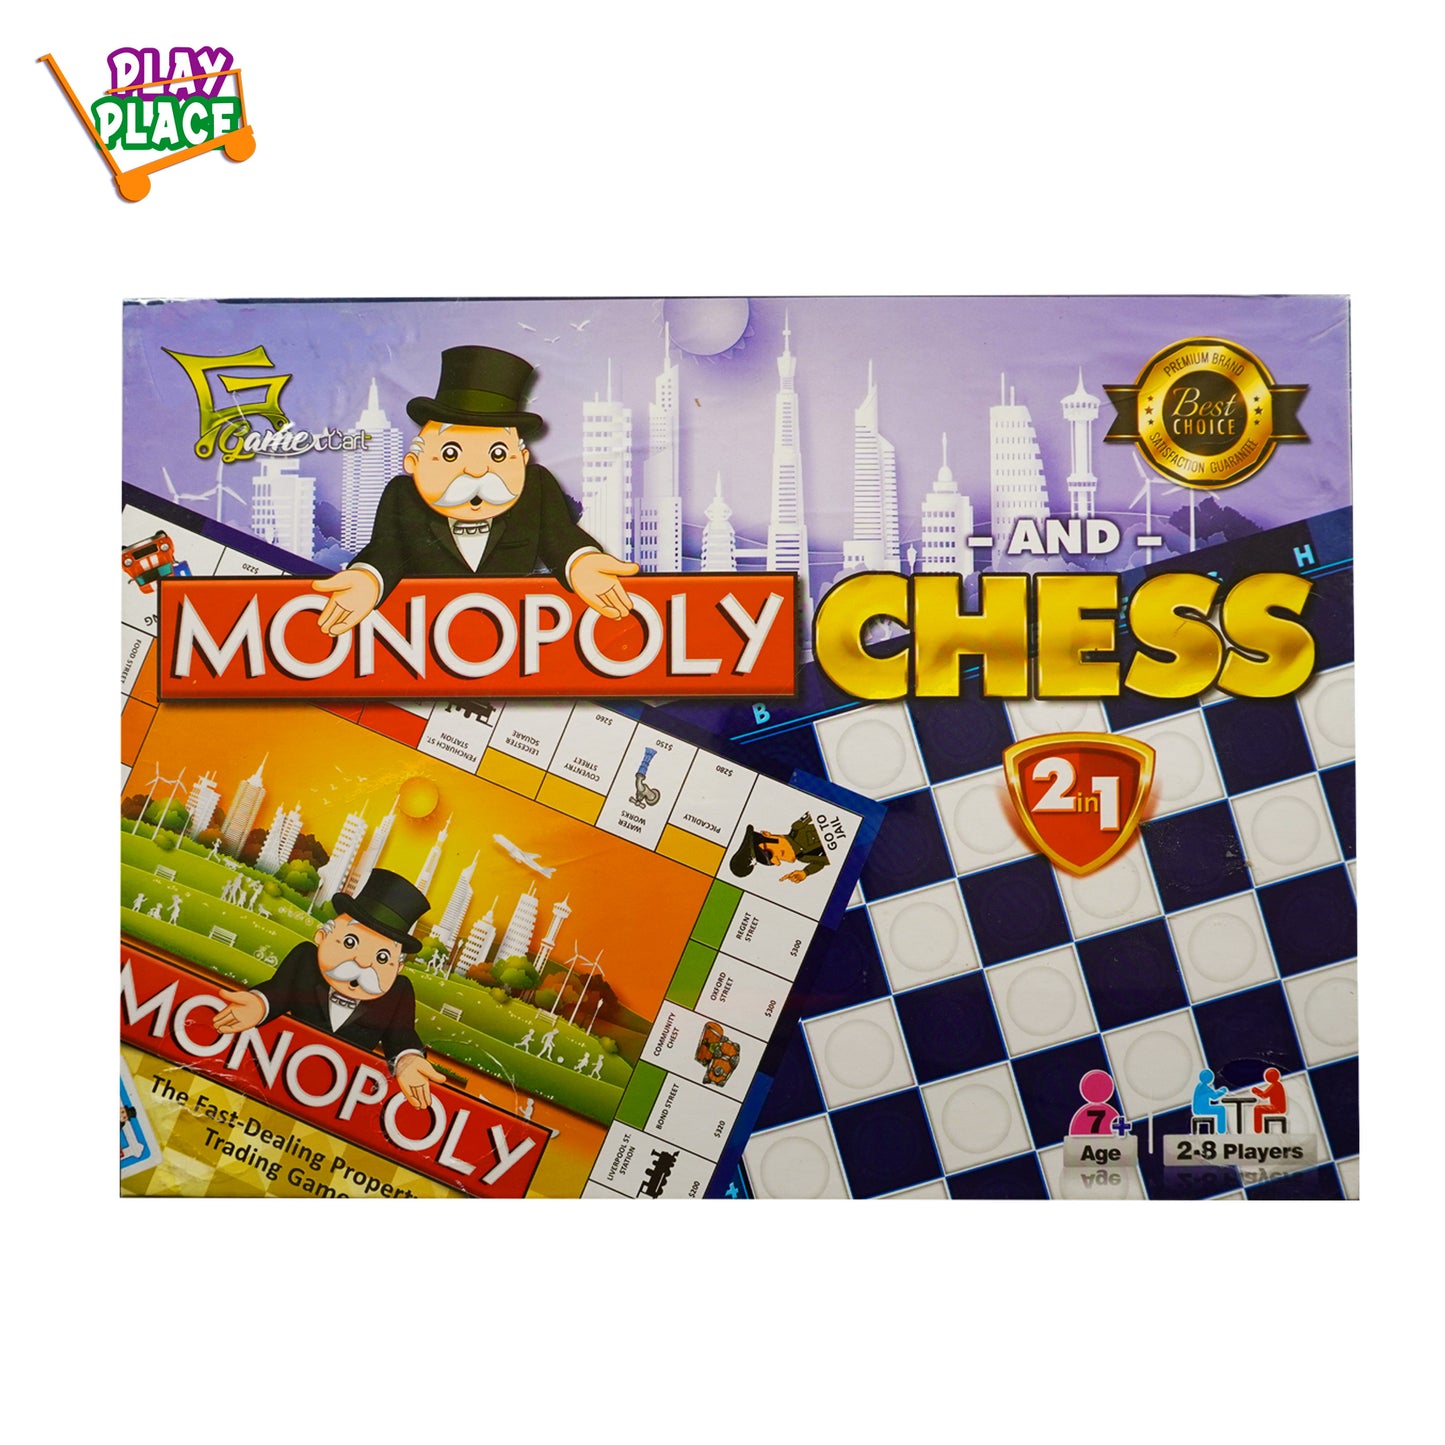 Monopoly and Chess – 2 In 1